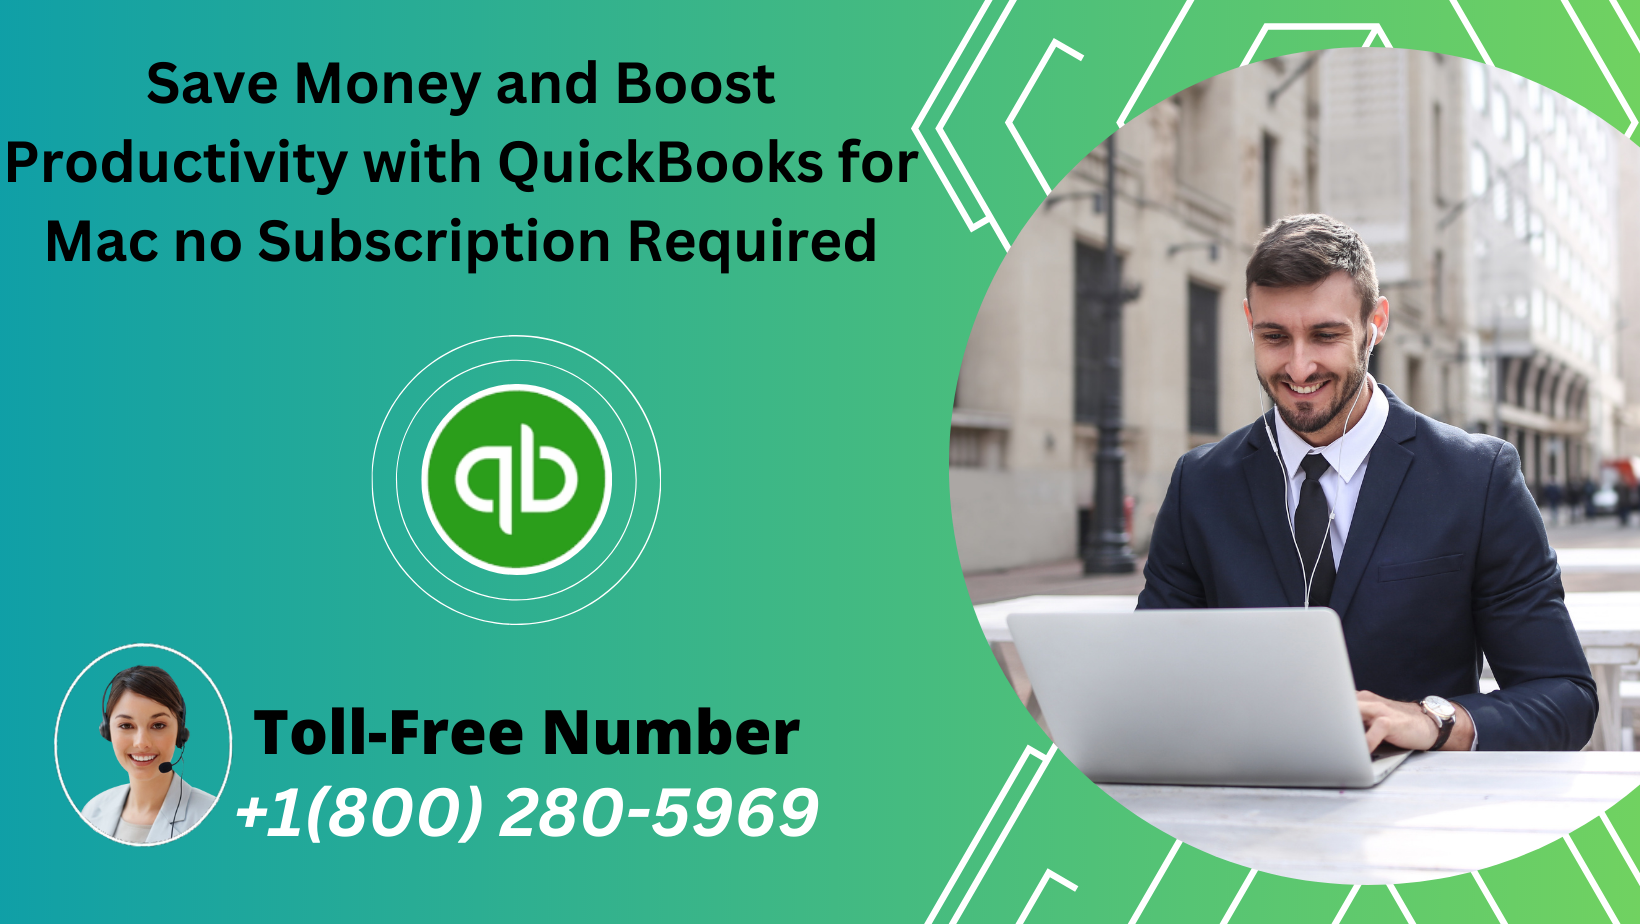 QuickBooks For MAC is the resource to boost Productivity